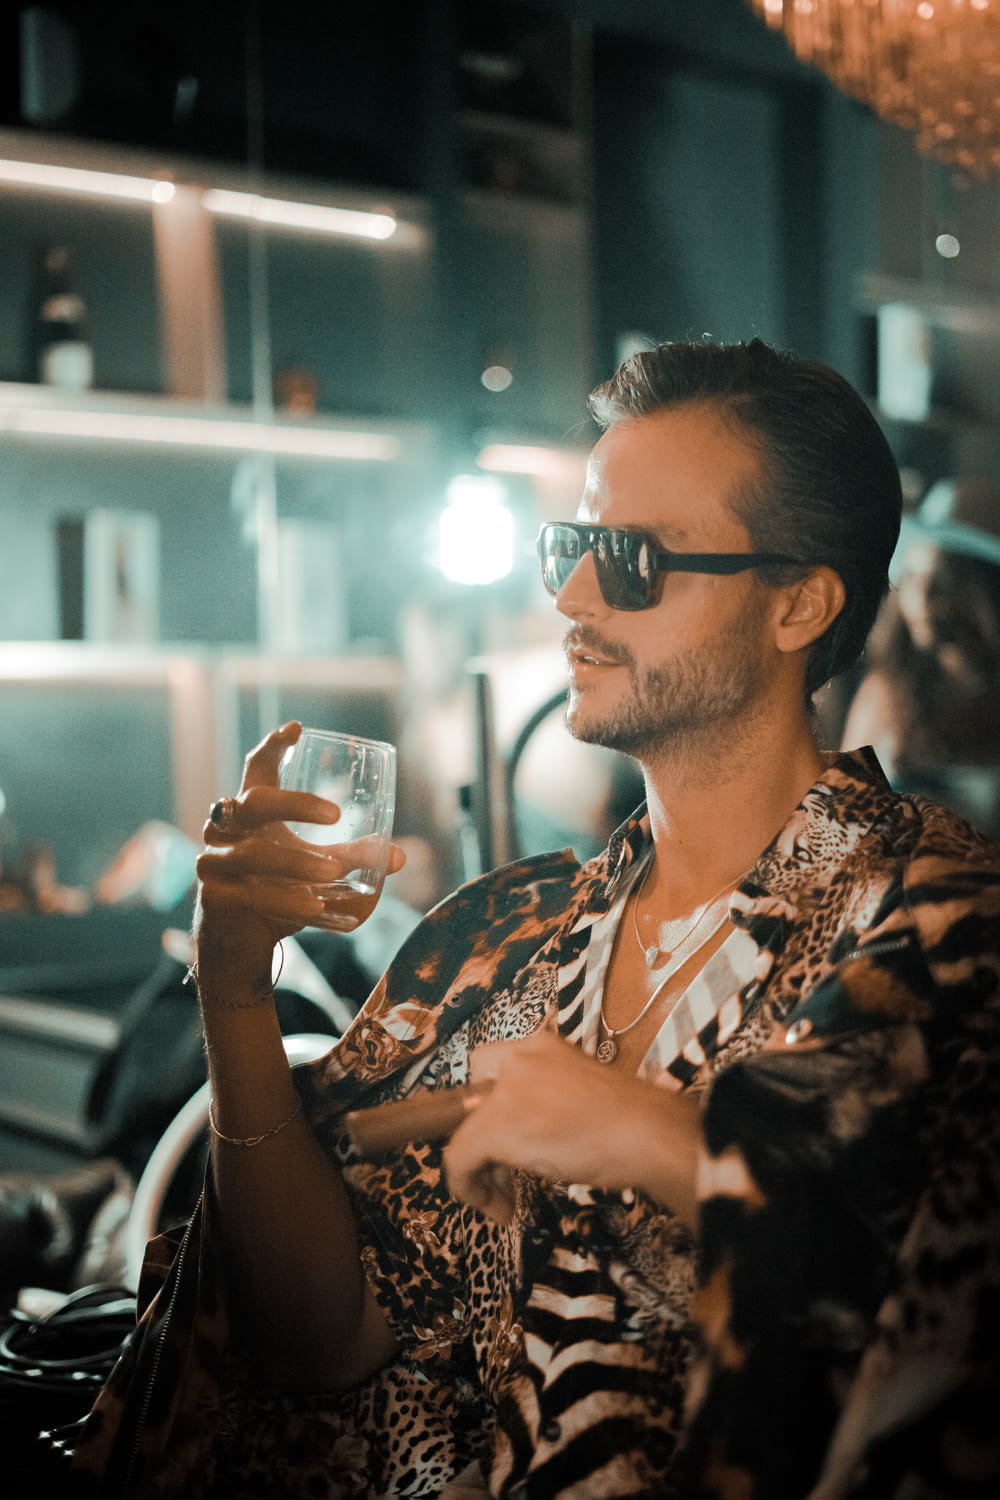 a man wearing sunglasses holding a glass of wine